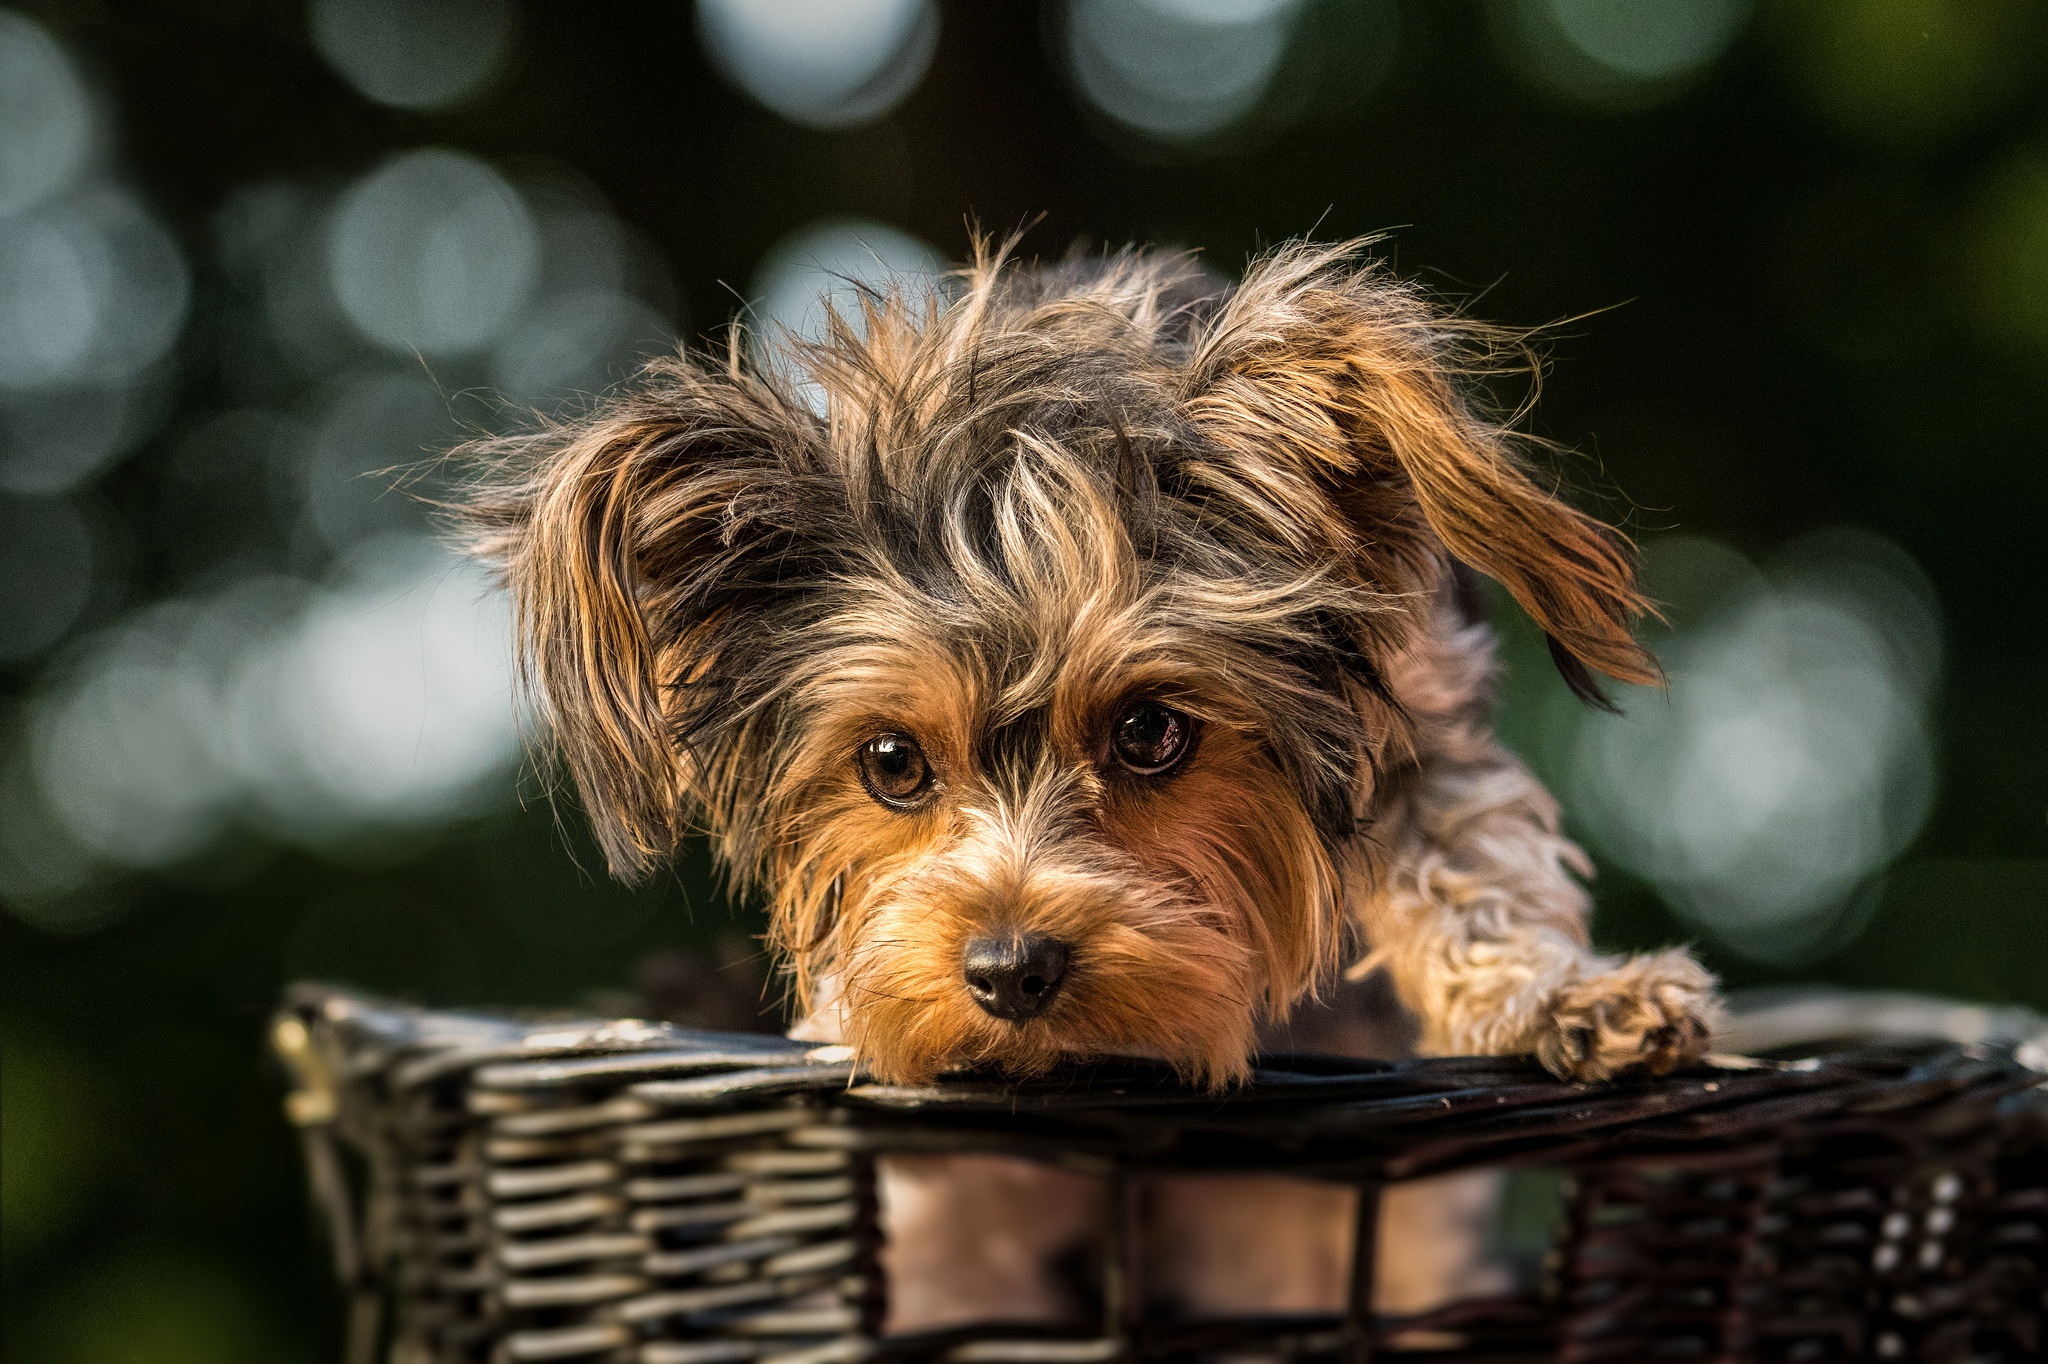 animal, puppy, baby animal, basket, cute, dog, terrier, dogs